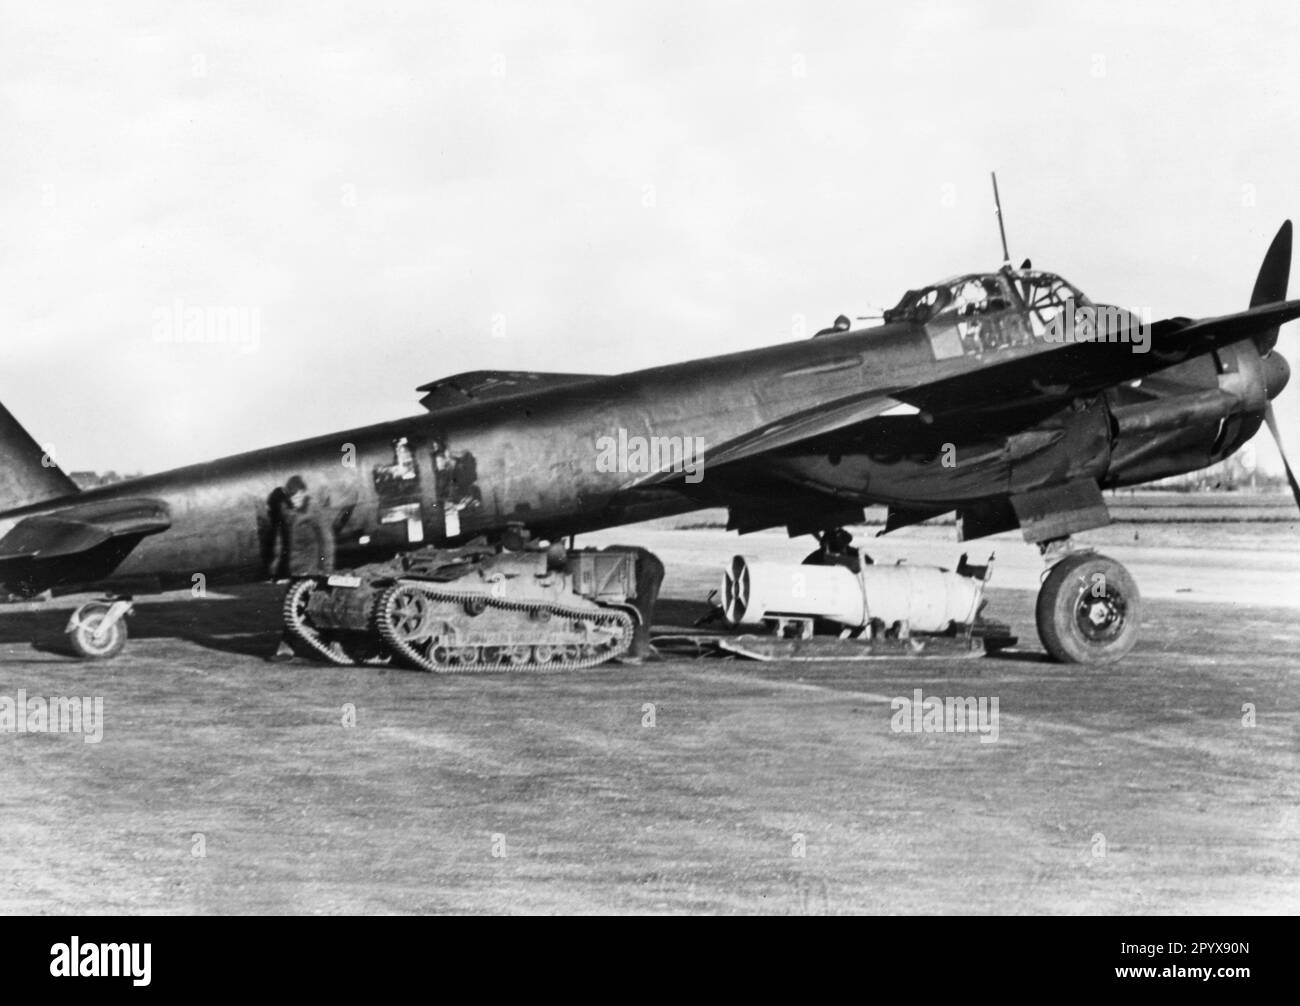 A German Junkers Ju 88 fighter plane is loaded with bombs for a mission against targets in England. The undercarriage of a French tank serves as the tractor. The aircraft is painted with a dark camouflage paint, the beam cross is partly dark colored as well. Photo: Rempel. [automated translation] Stock Photo